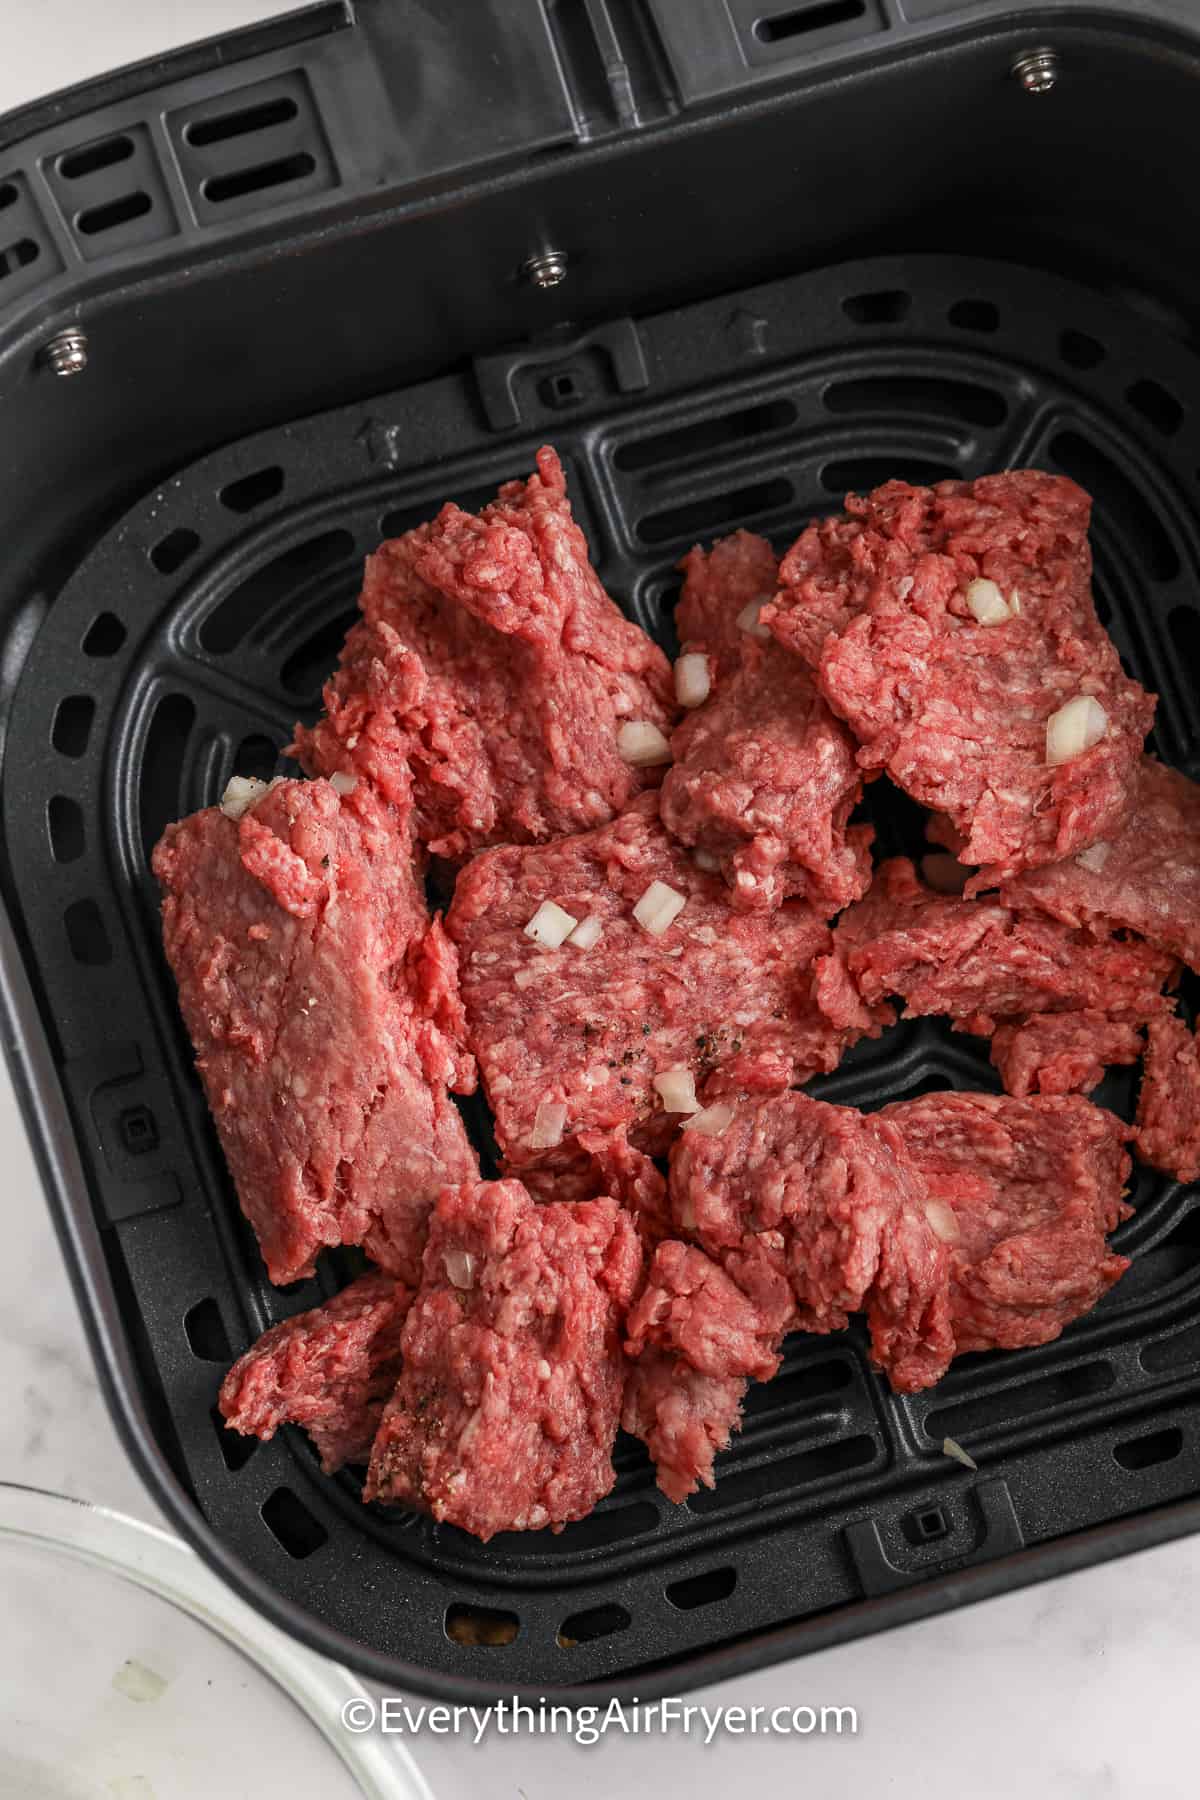 uncooked ground beef in an air fryer tray